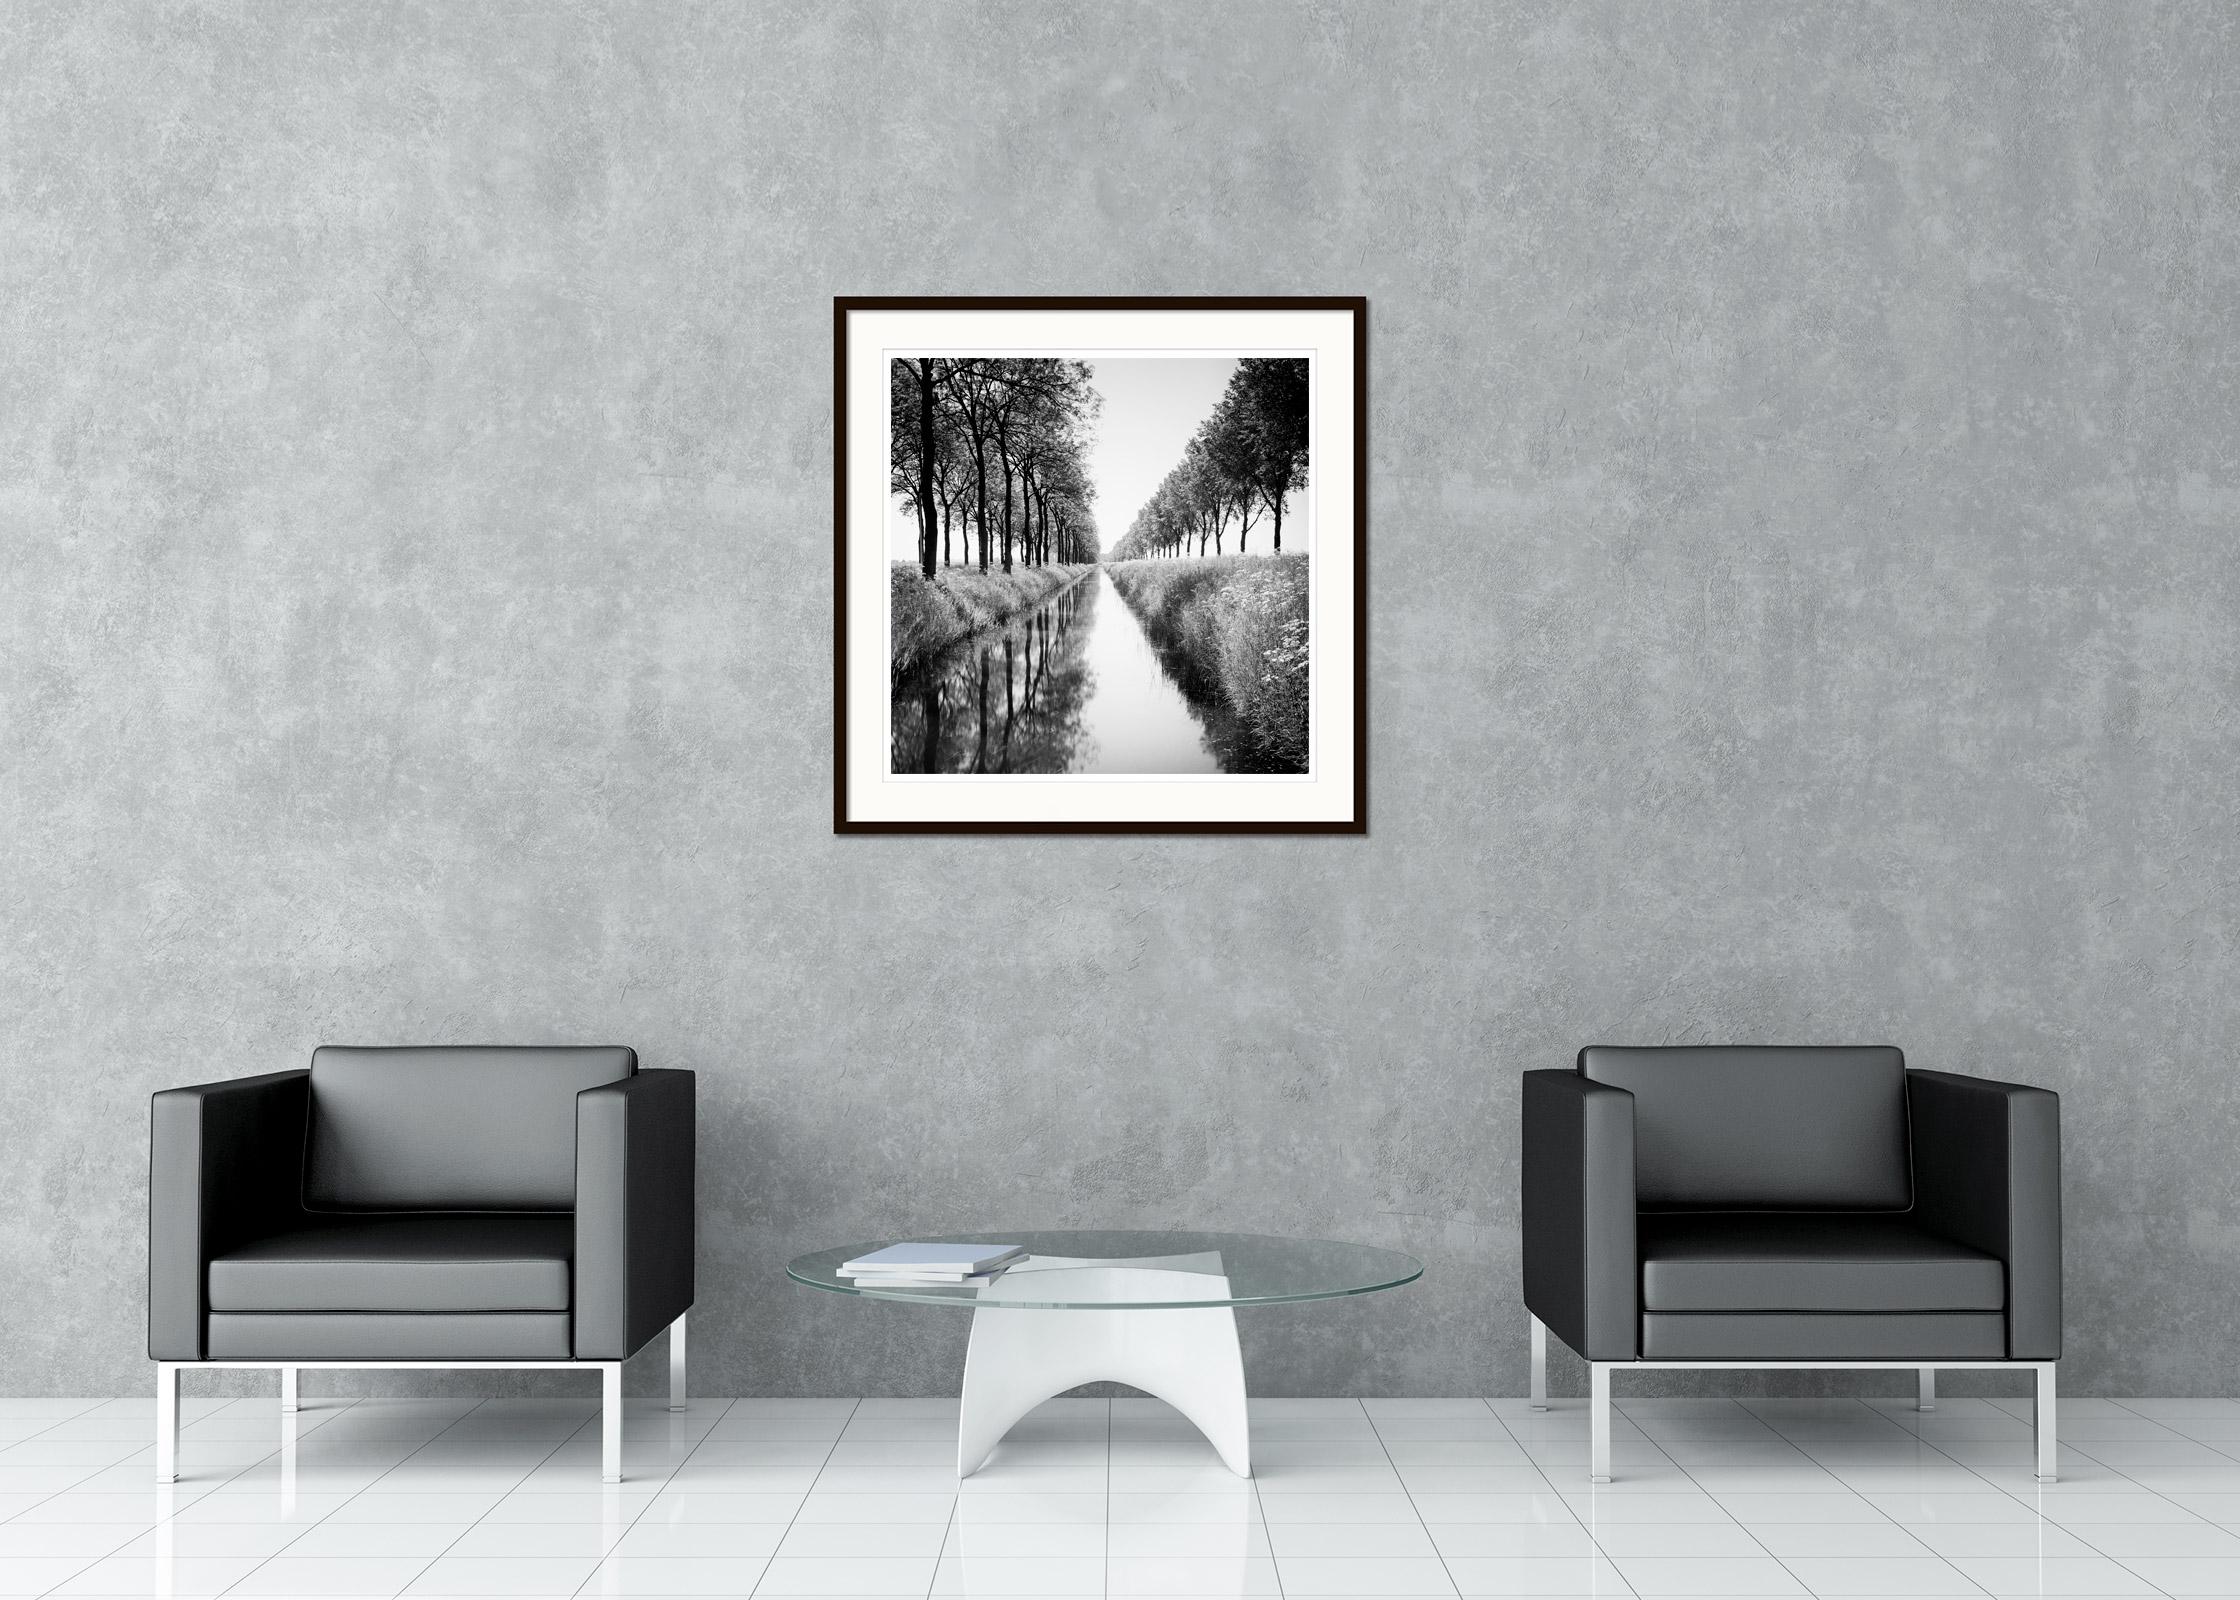 Black and White Fine Art Waterscape Photography - Avenue of trees by a water ditch with reflections in the calm water. Archival pigment ink print, edition of 9. Signed, titled, dated and numbered by artist. Certificate of authenticity included.